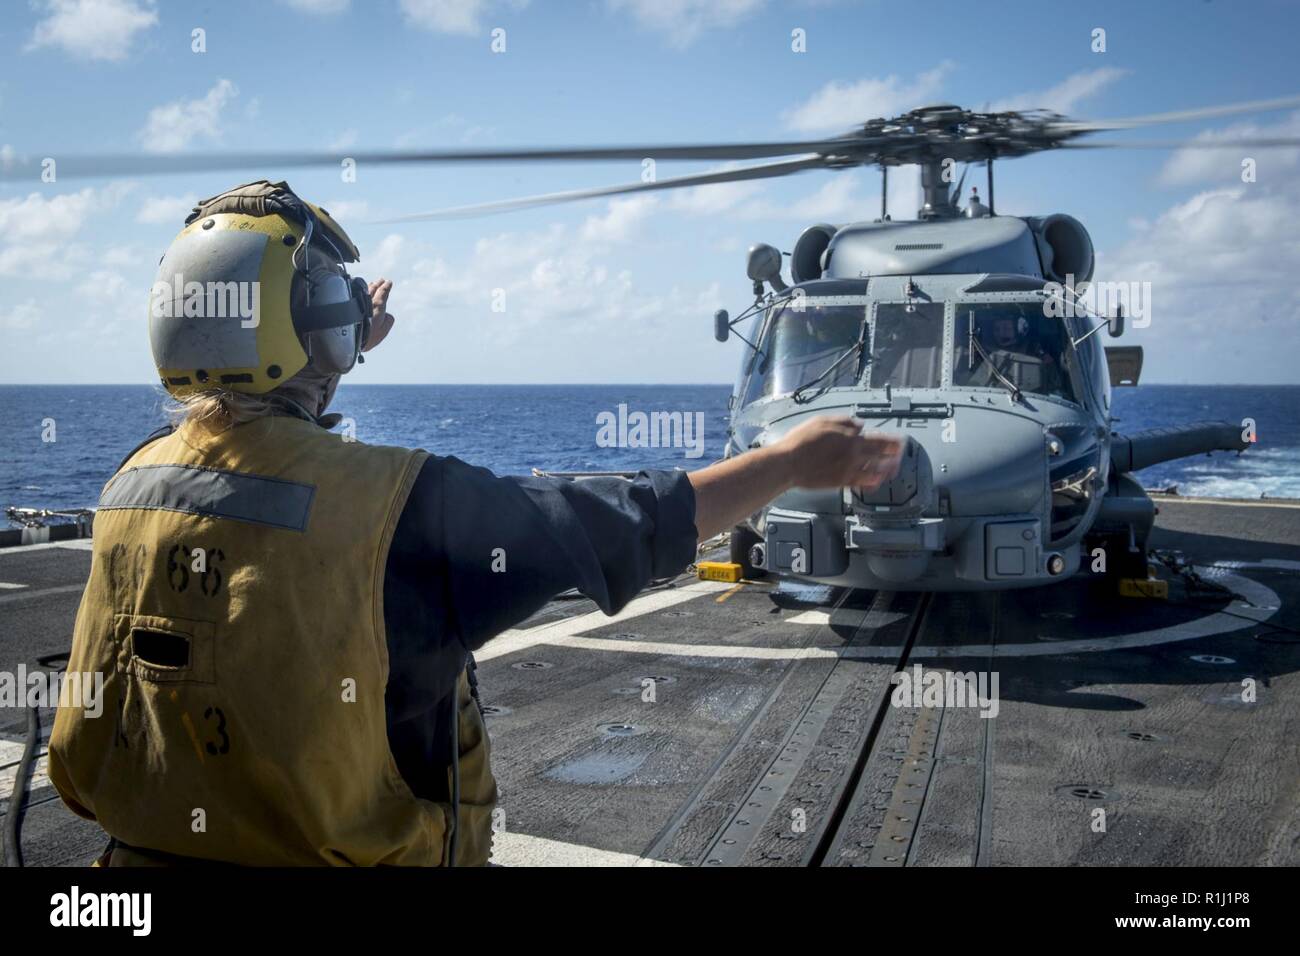 ATLANTIC OCEAN (Sept. 24, 2018) Boatswain's Mate 2nd Class Sarah R. Miller from Manteno, Illinois, directs an MH-60R Sea Hawk helicopter, assigned to the 'Spartans' of Helicopter Maritime Strike Squadron (HSM) 70, during flight operations aboard the Ticonderoga-class guided-missile cruiser USS Hue City (CG 66). Hue City is currently underway on a regularly scheduled deployment. Stock Photo